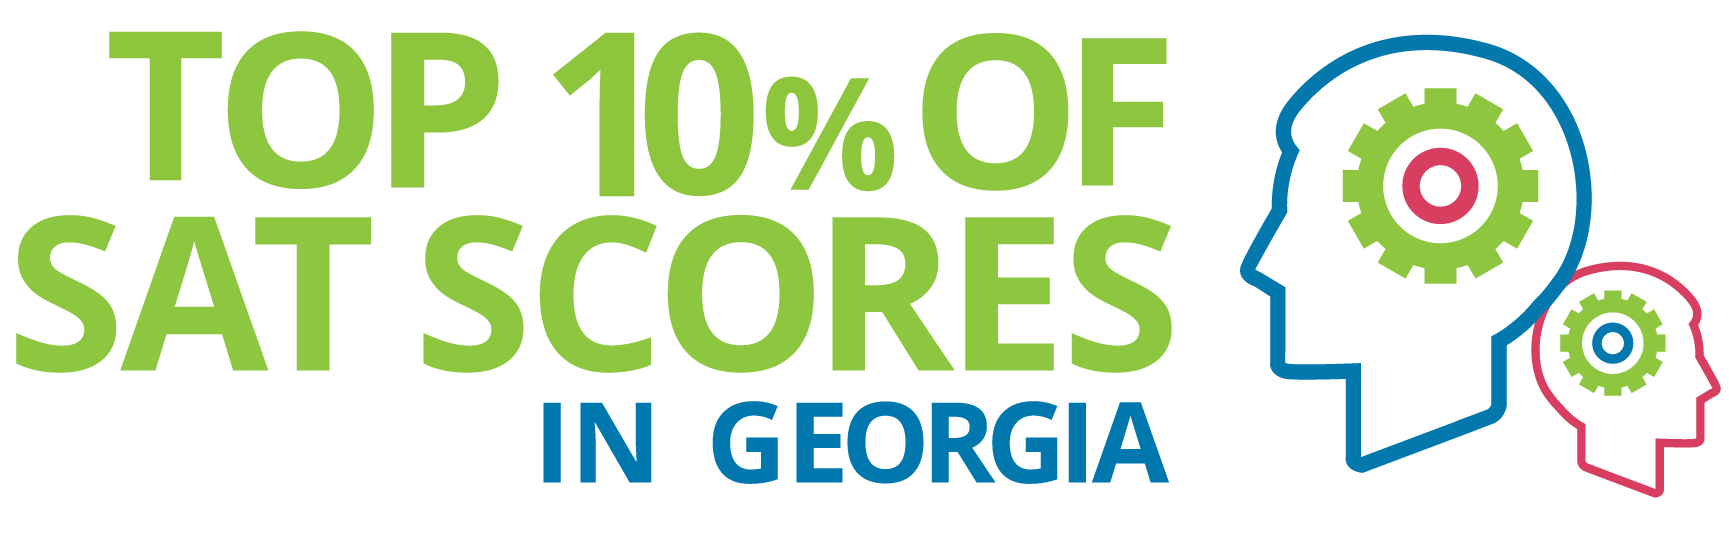 Cherokee County has the top 10% of SAT Scores in Georgia